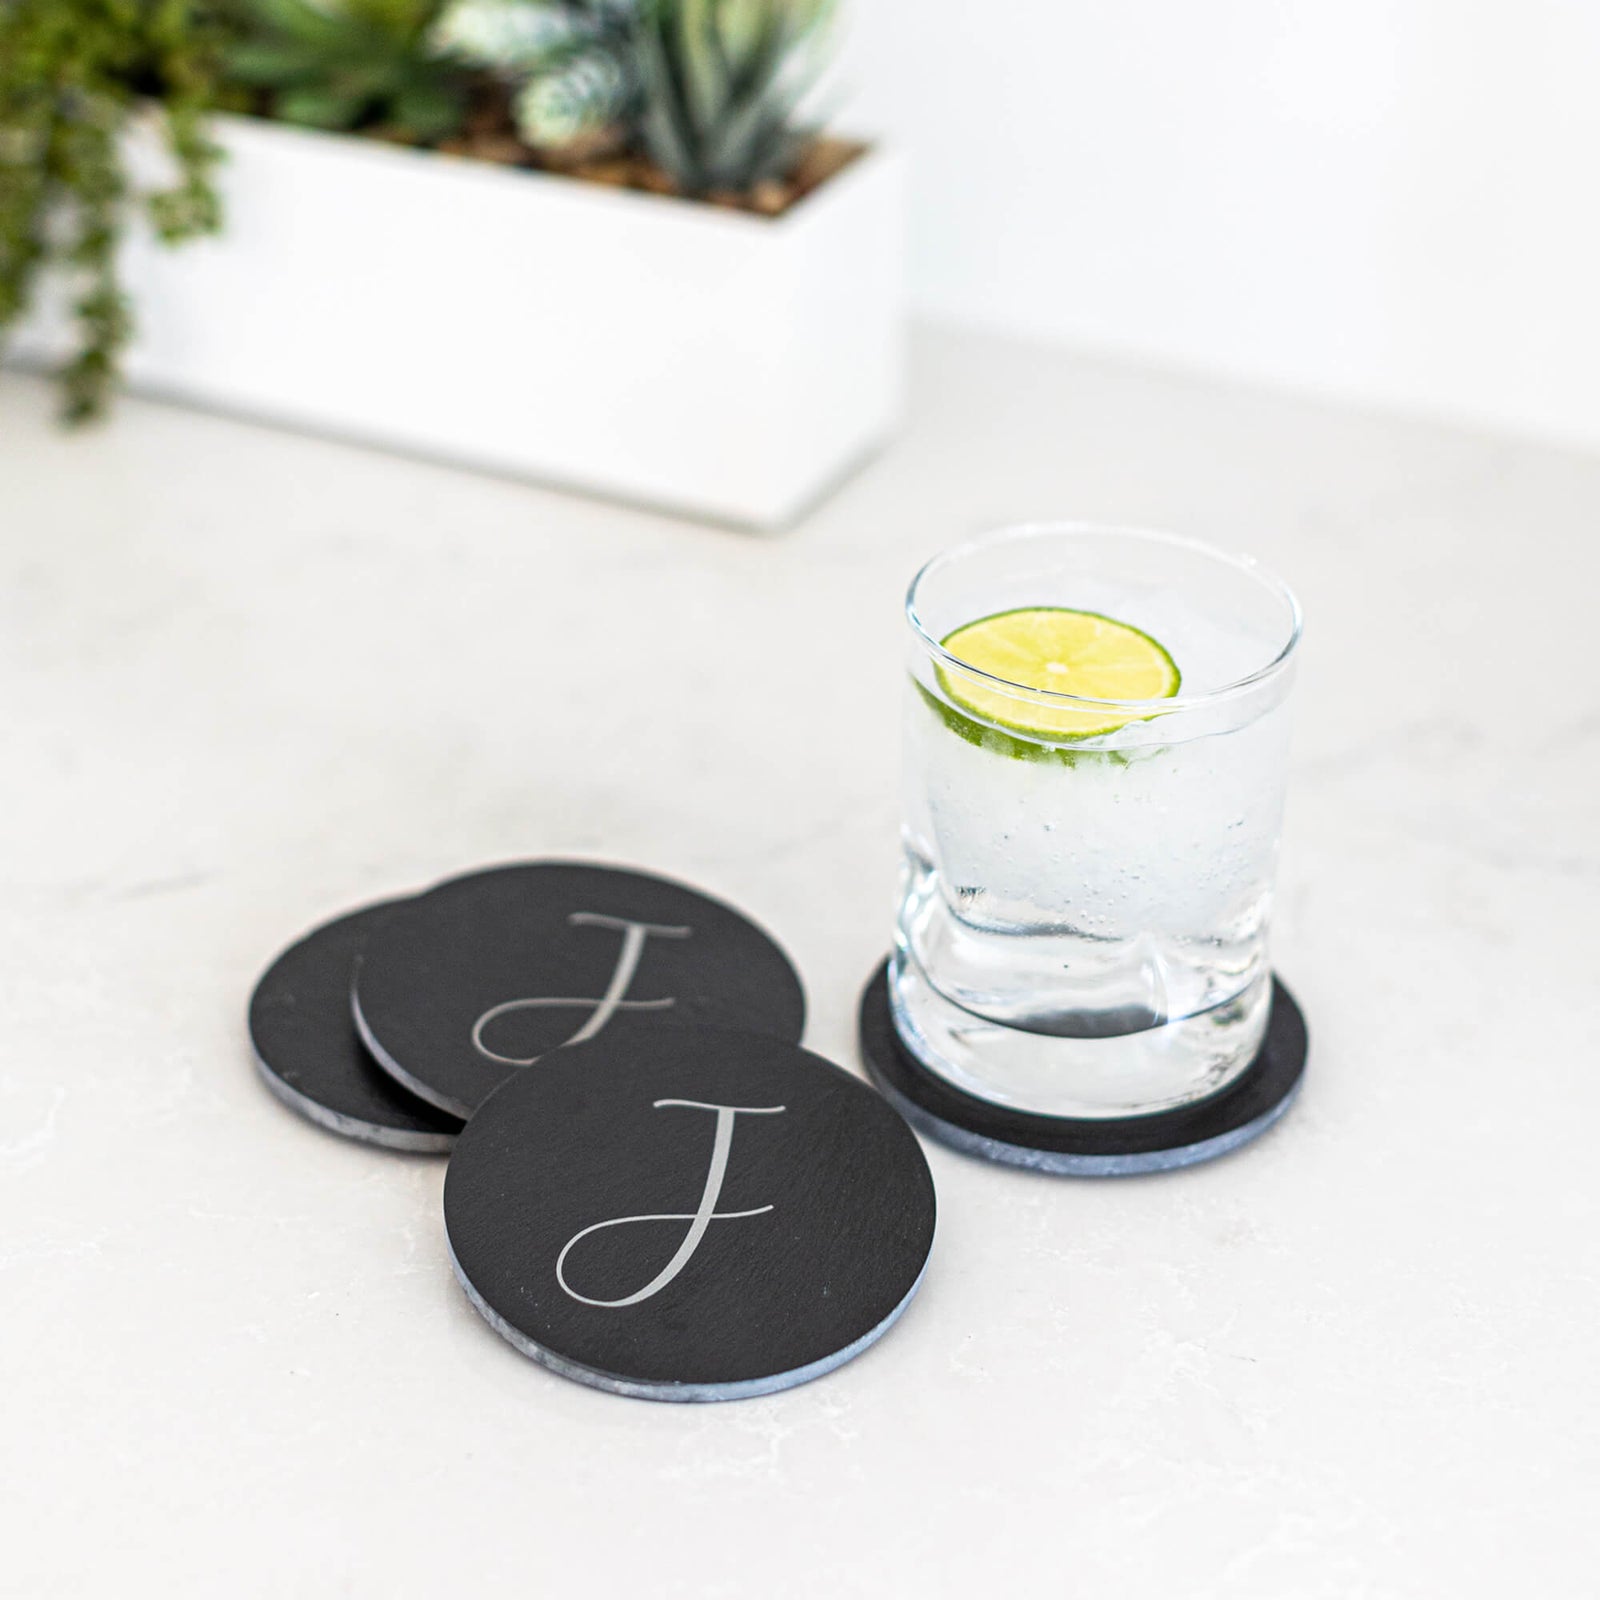 Slate Coaster Set with Initial - 4 pieces